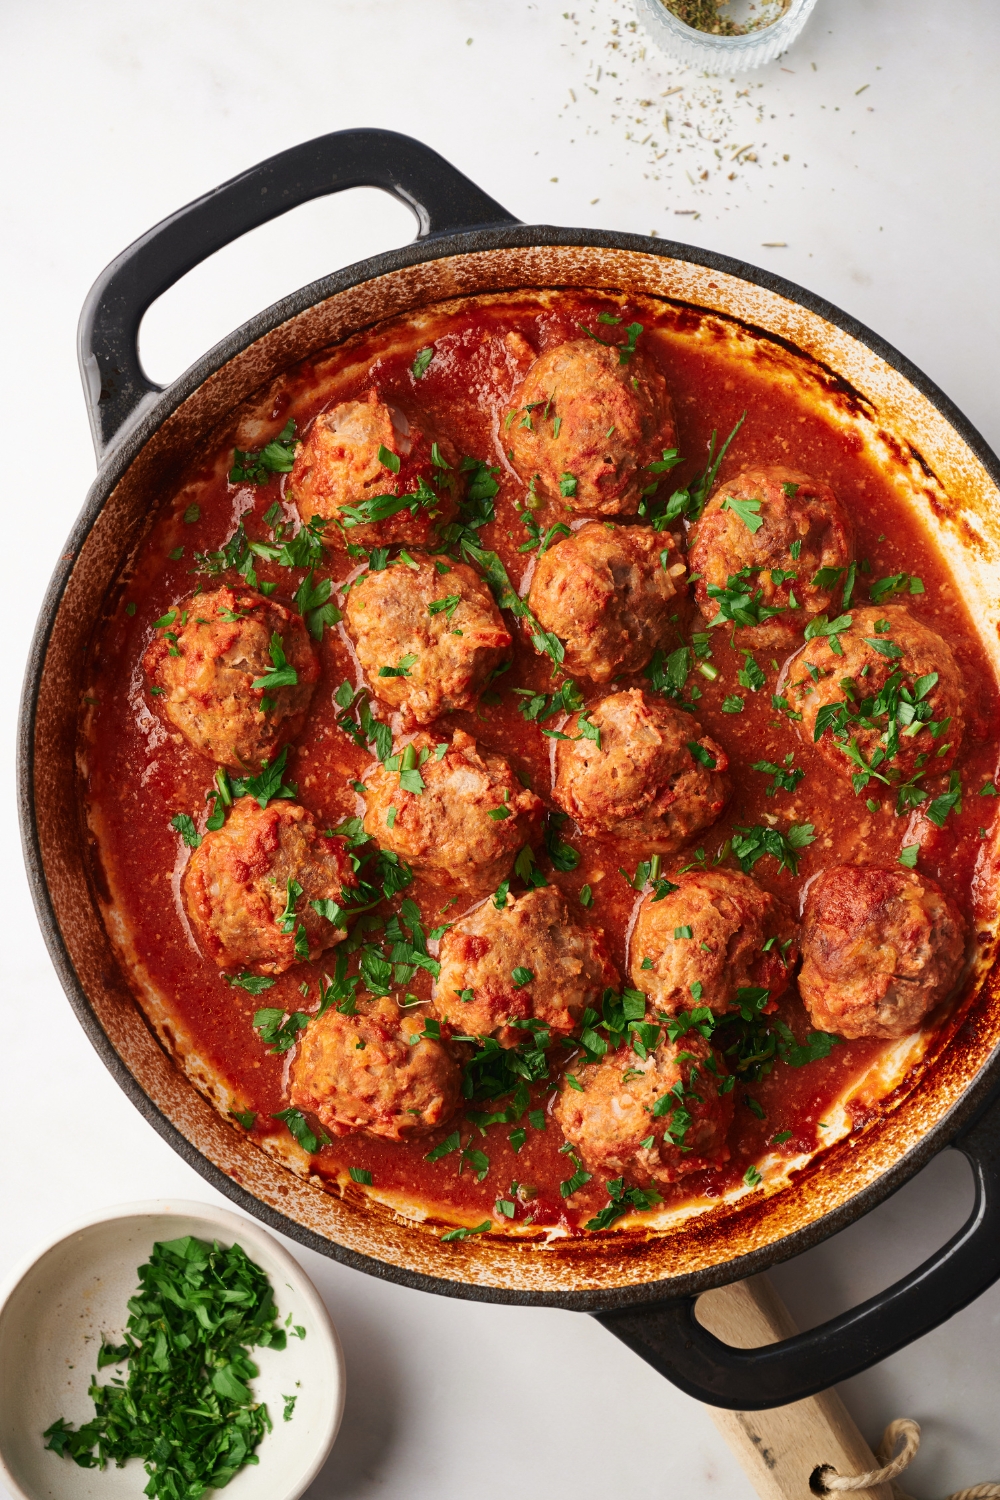 a pot of cooked porcupine meatballs in a tomato sauce